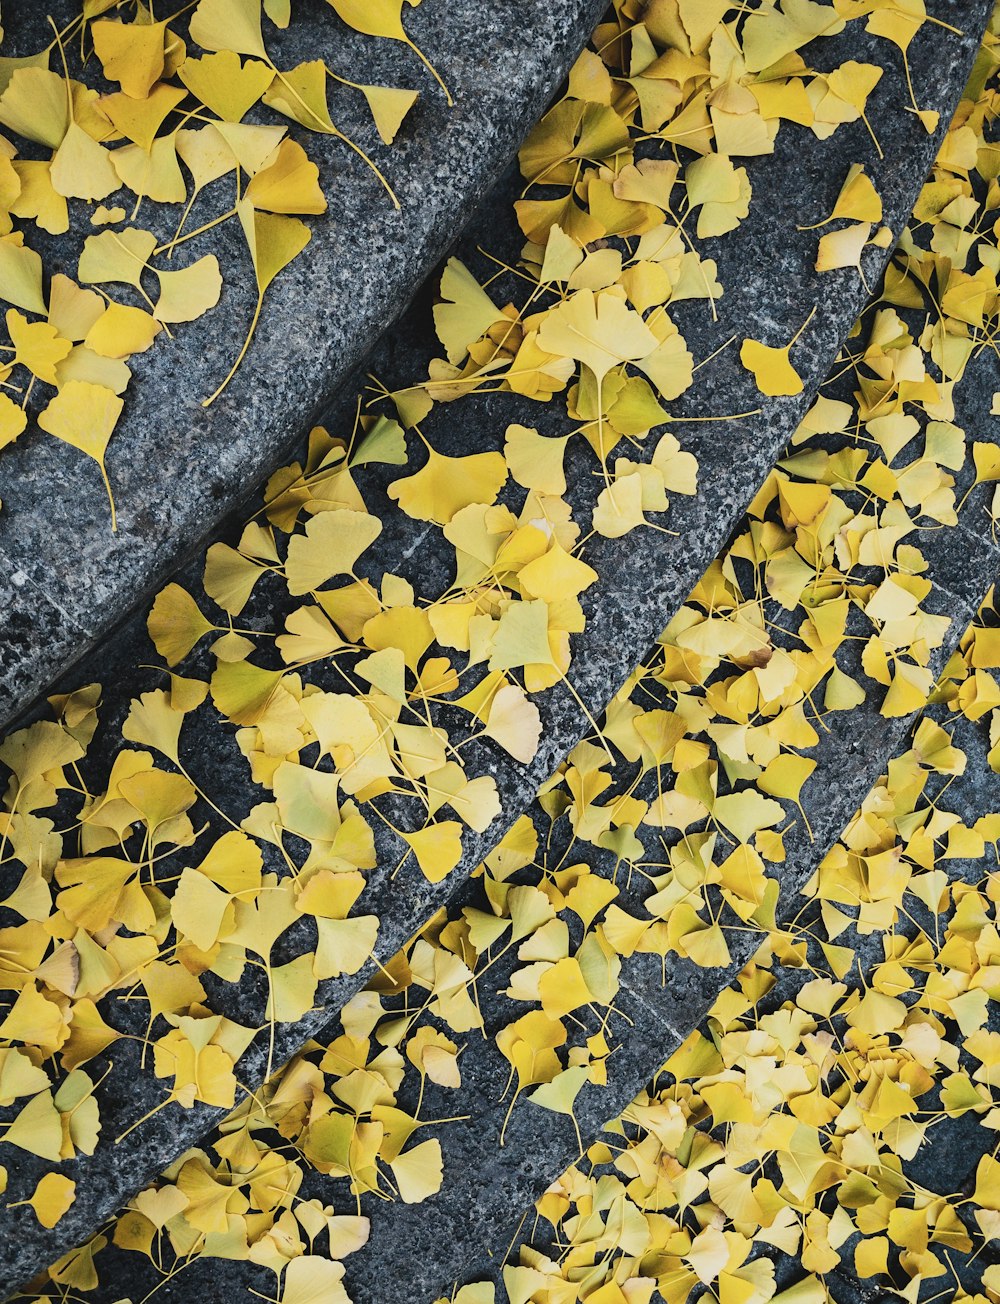 yellow leaf lot on concrete stairs